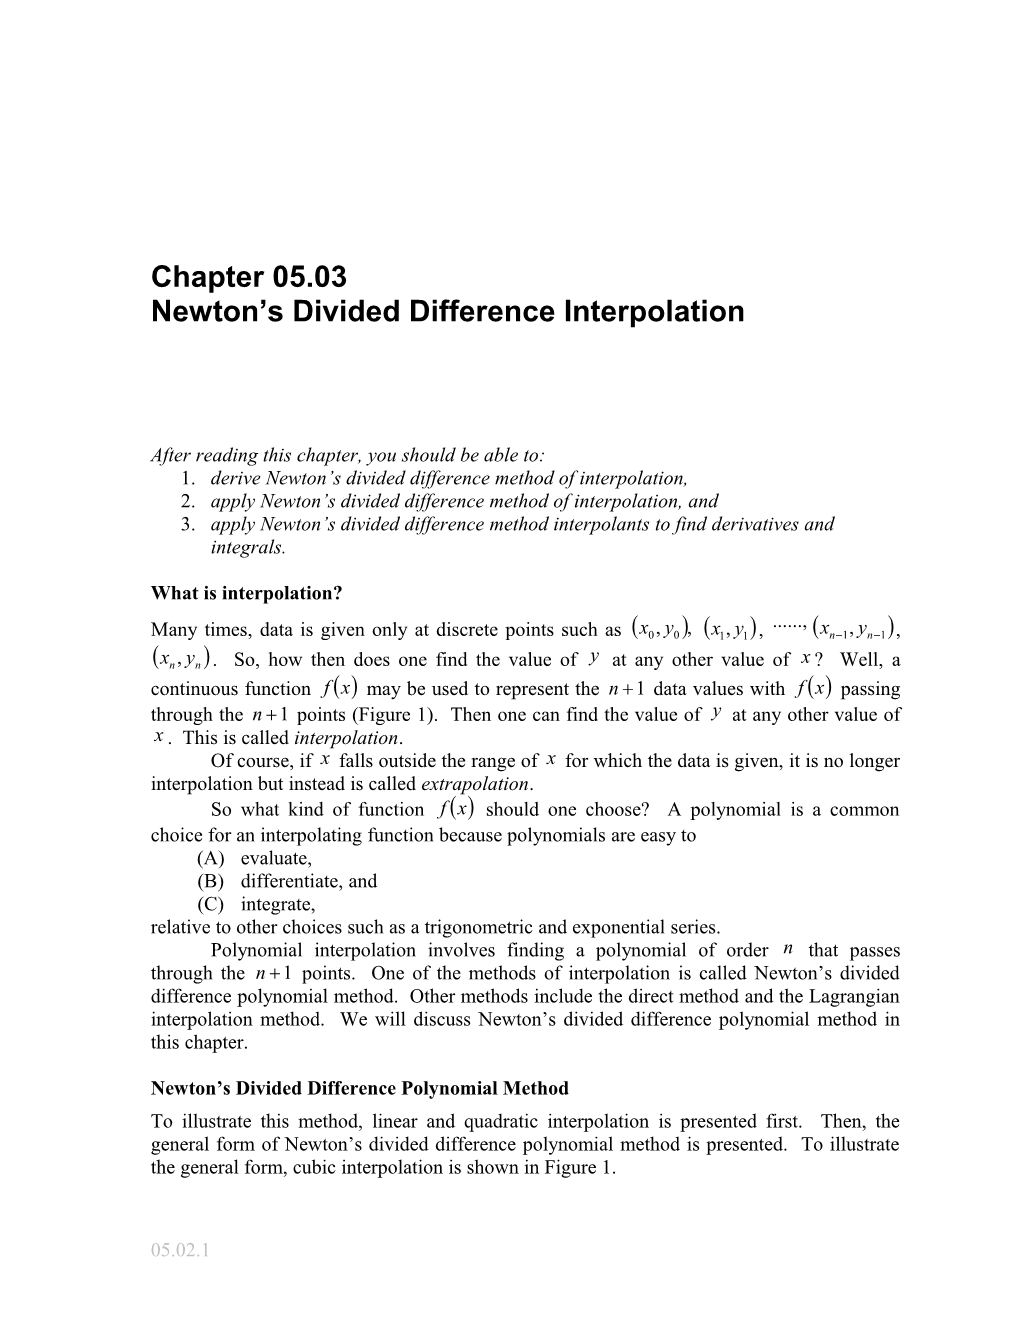 Newton's Divided Difference Method of Interpolation: General Engineering s1